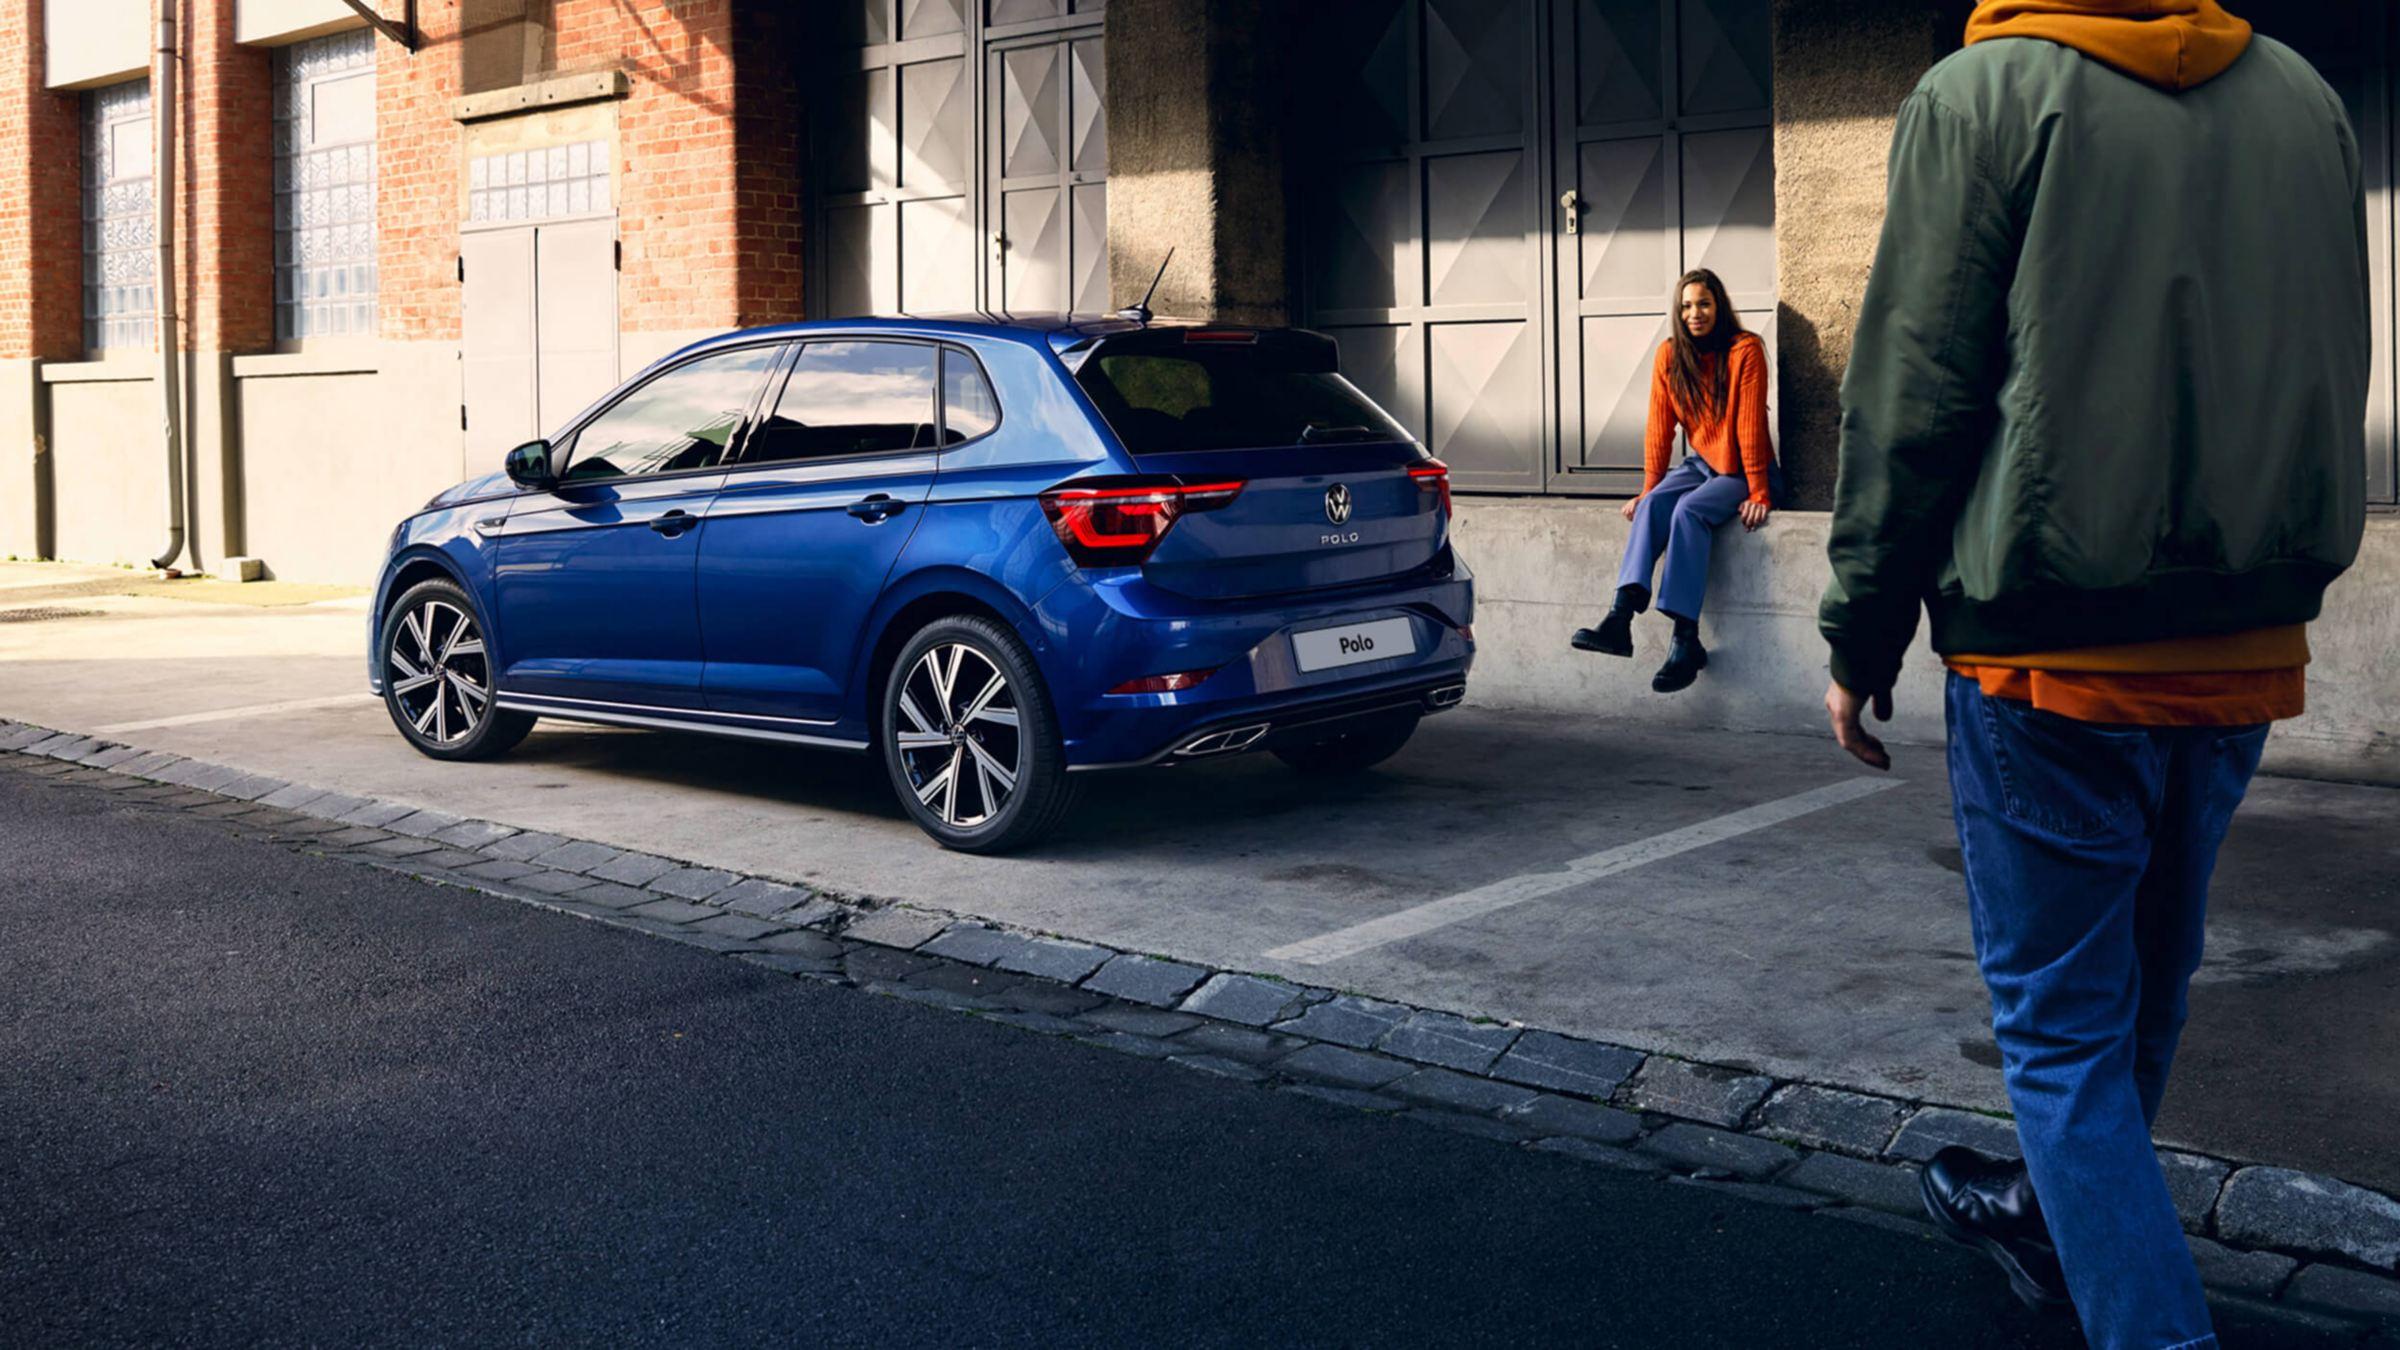 New Volkswagen Polo | 2022/23 VW Polo Deals | JCT600